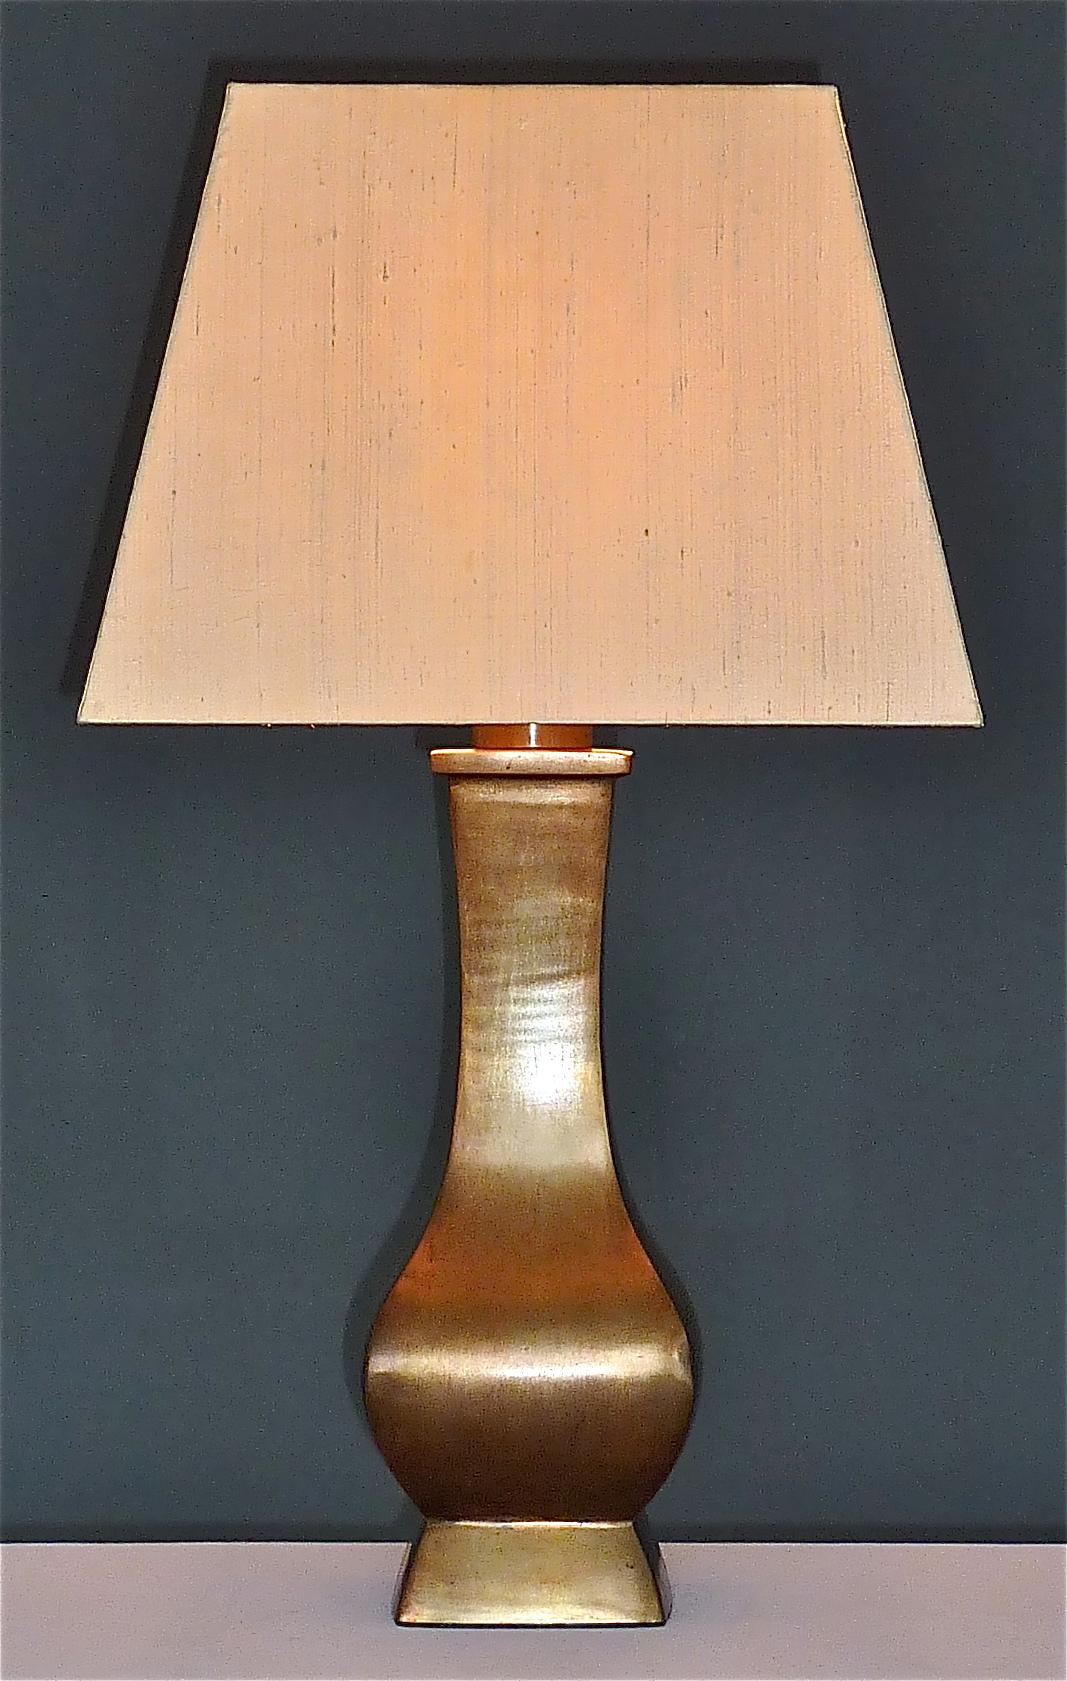 Huge Patinated Bronze Table Lamp Pergay Crespi Maison Jansen Style France 1970s For Sale 6